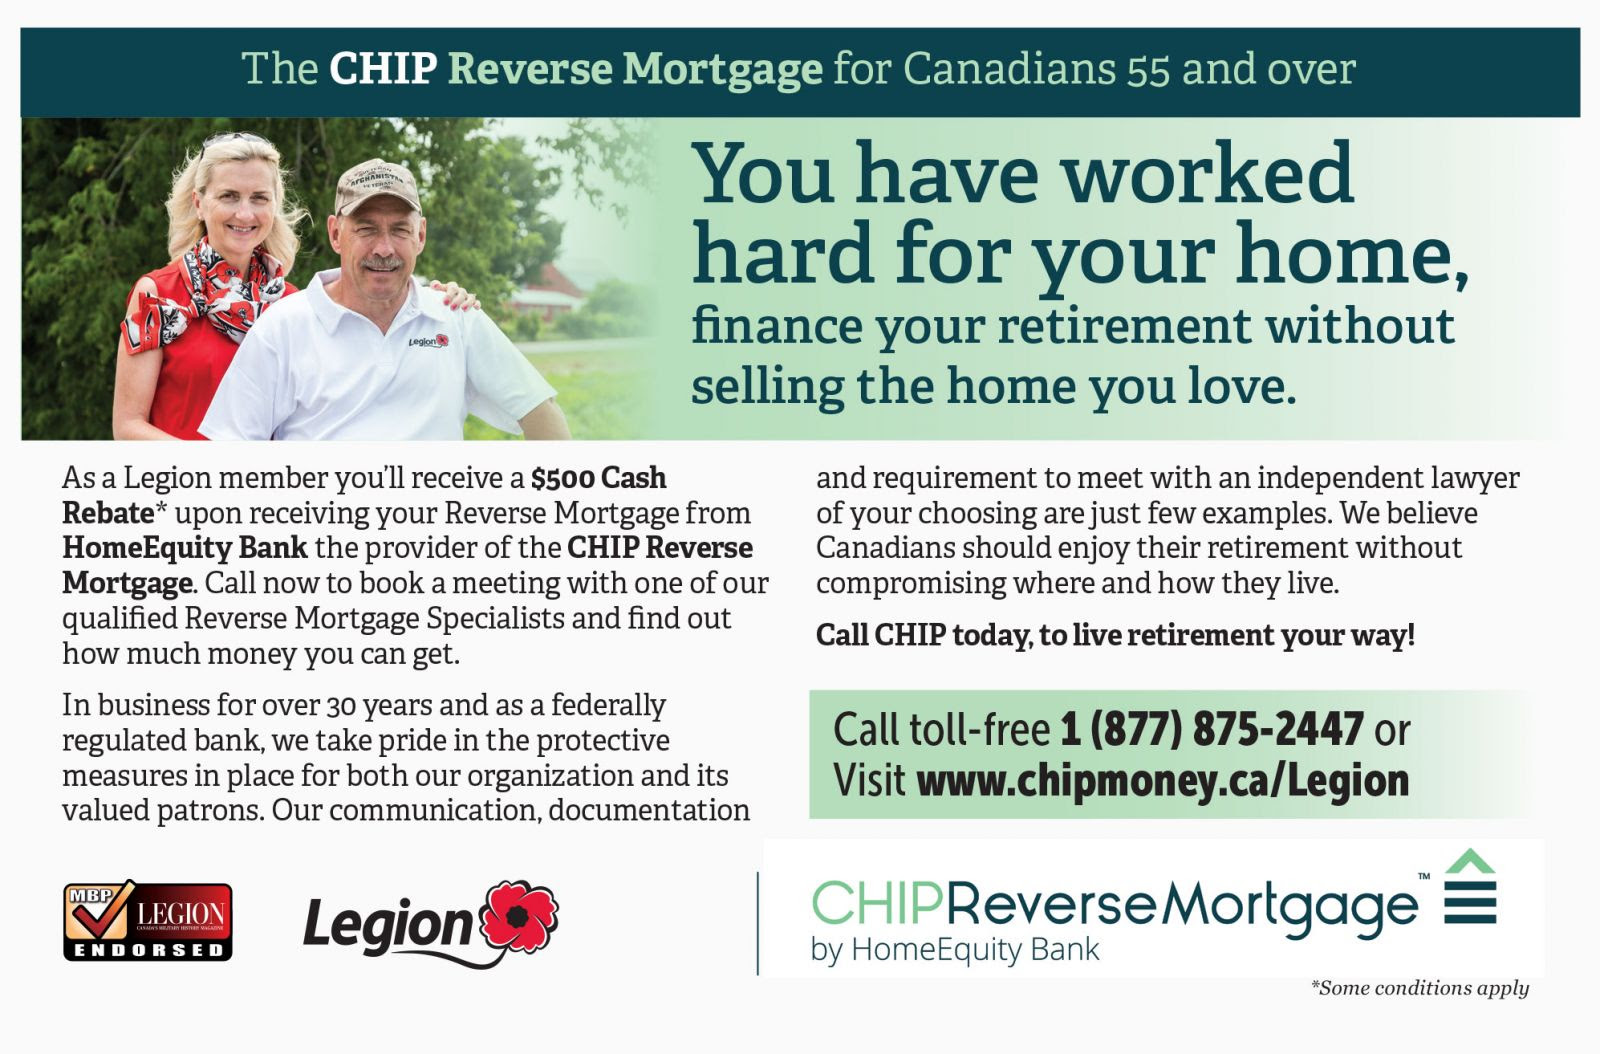 Home Equity - CHIP Reverse Mortgage